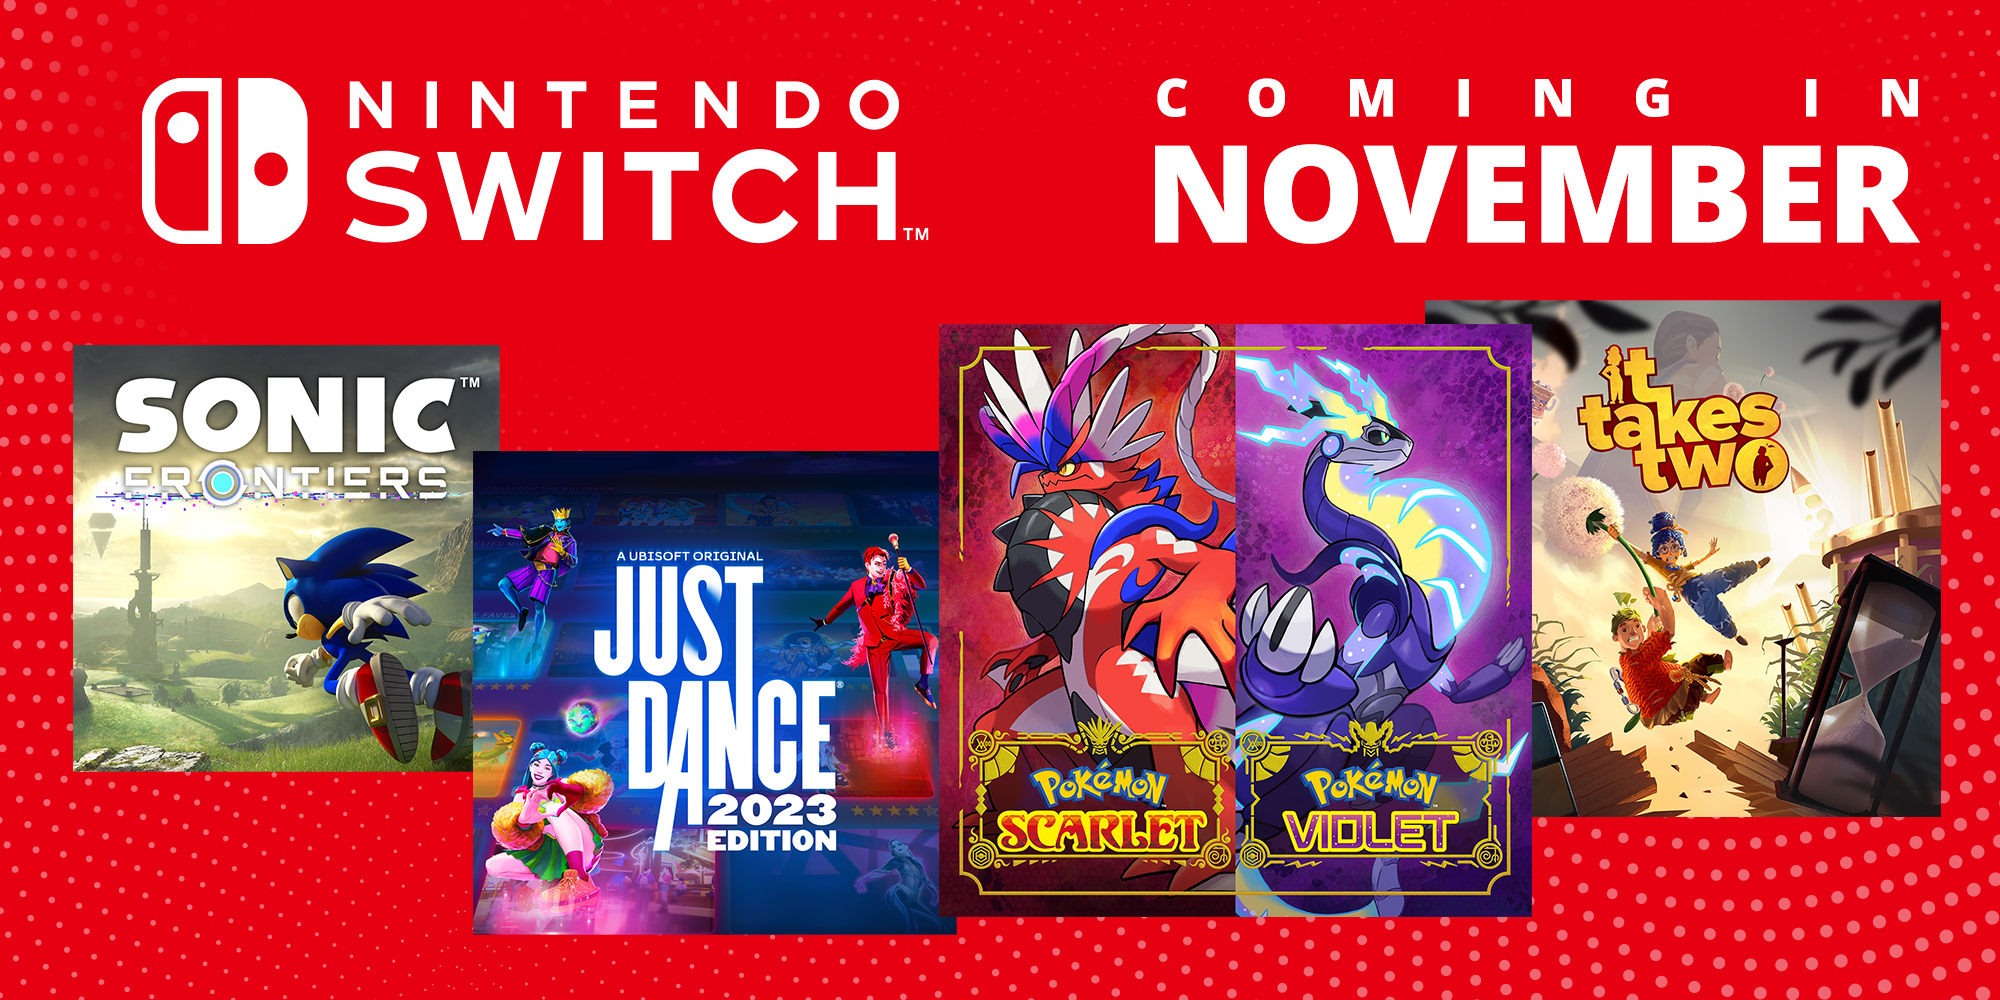 It Takes Two launches this November on Nintendo Switch